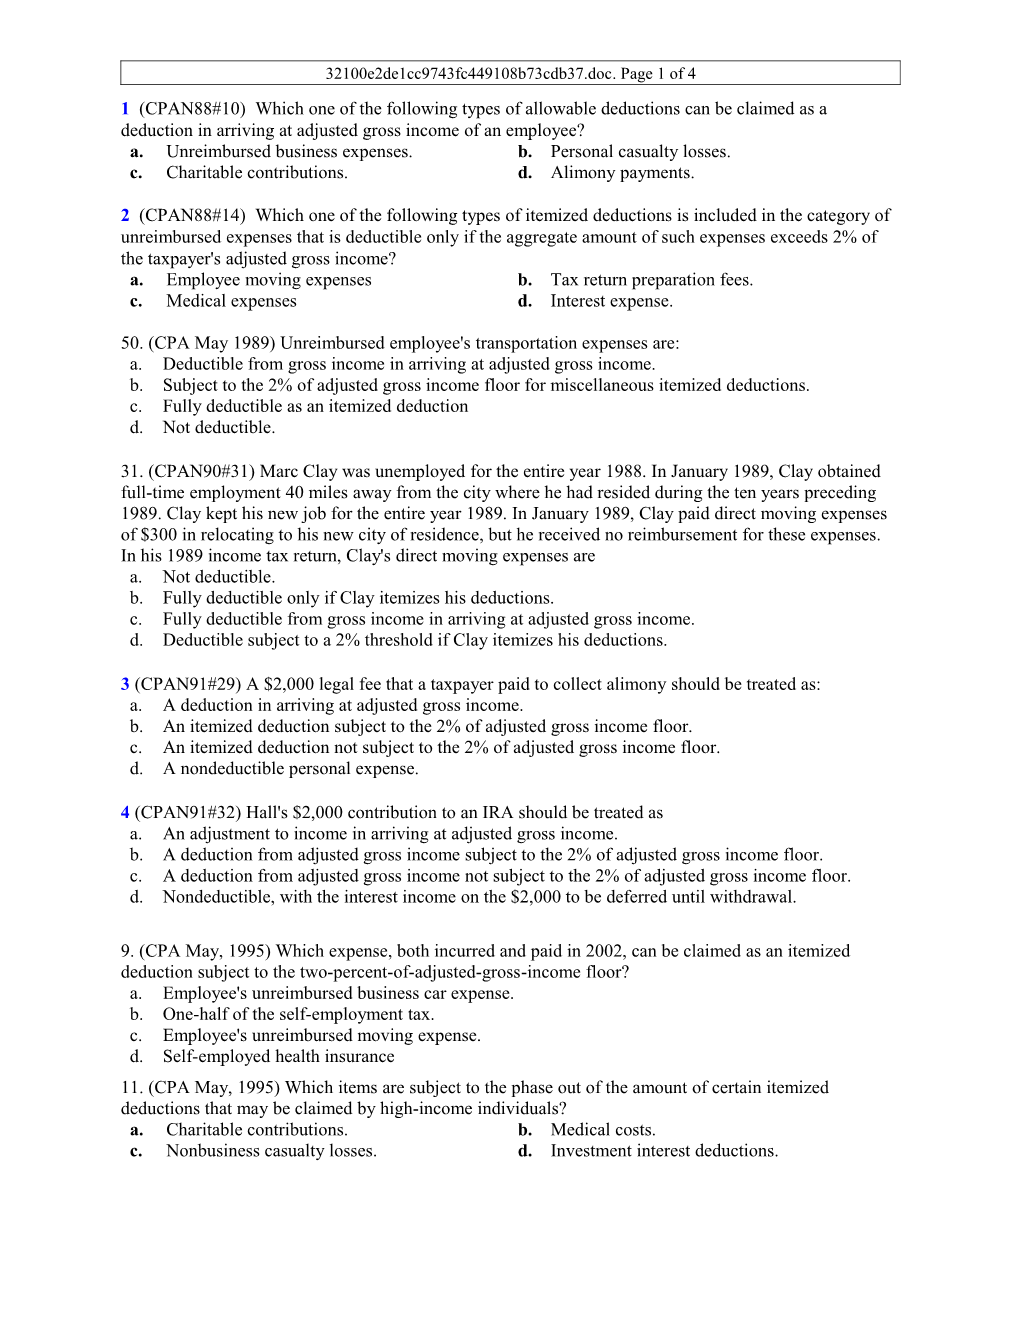 TRF5-02-10-CPA Exam Questions on Sec 61-Sec 68. Page 1 of 4